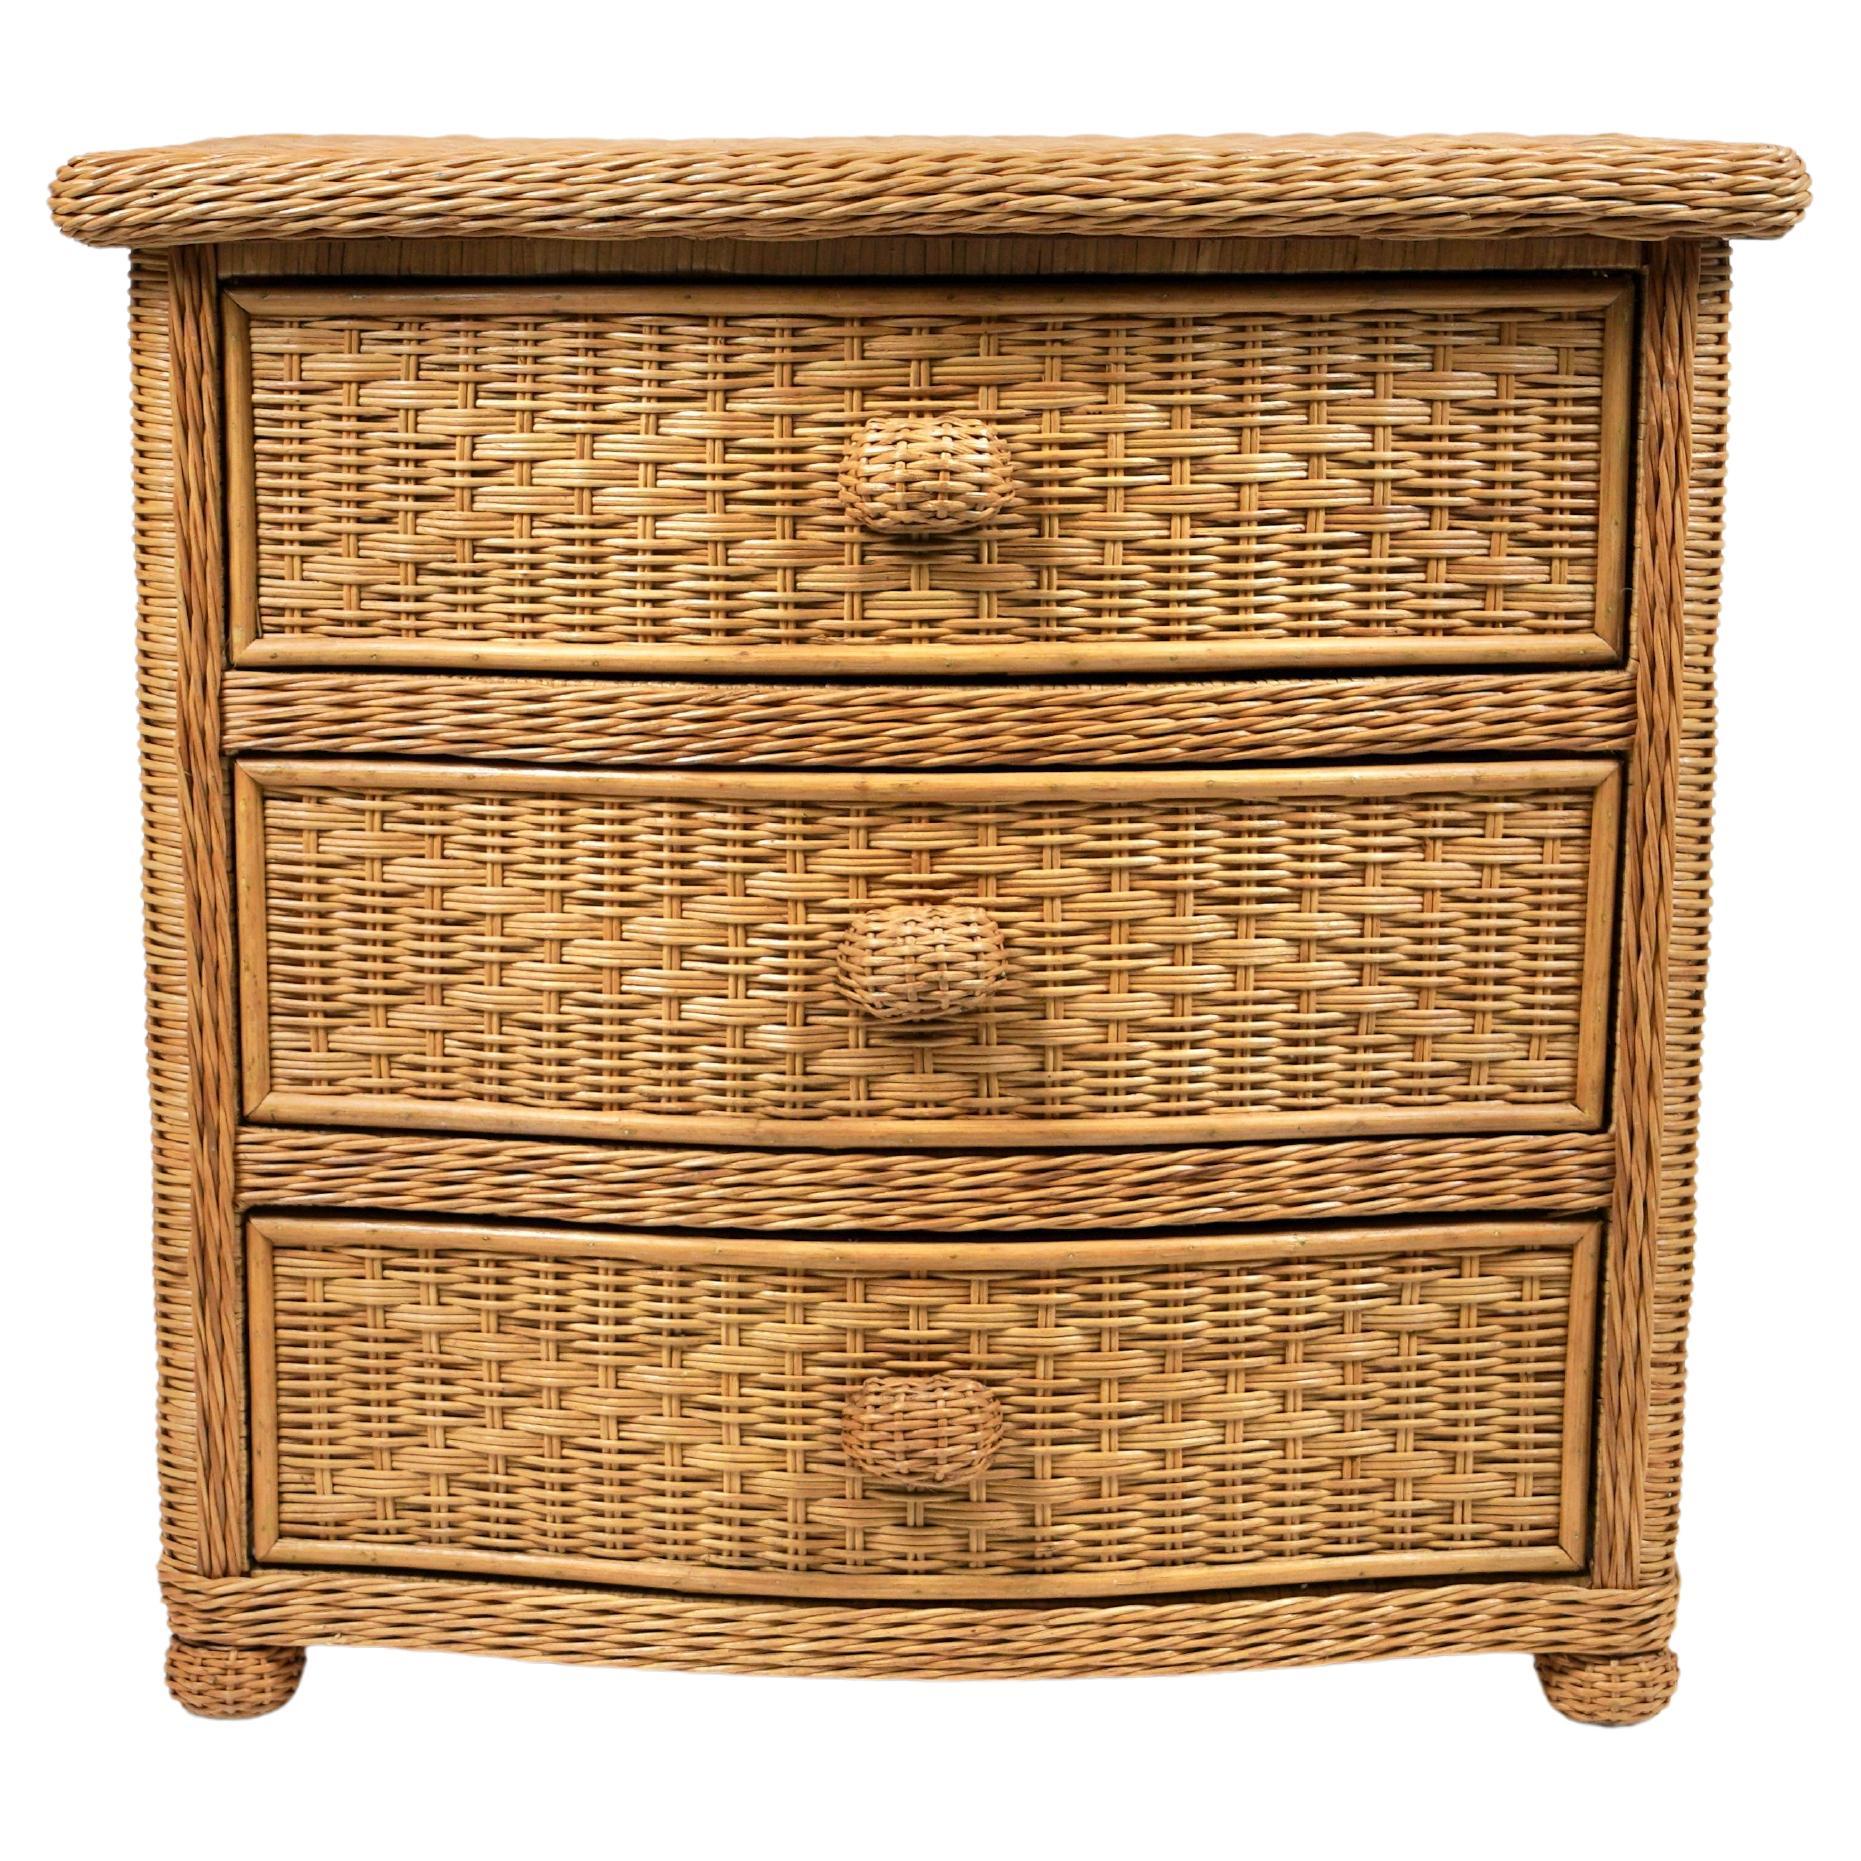 Midcentury gorgeous cabinet chest of three drawers in rattan and wicker Attributed to Vivai Del Sud. 

Made in Italy in the 1970s.

Vivai del sud, Gabriella Crespi and Arpex were the three leading design studios in 1970s Italy specialized in